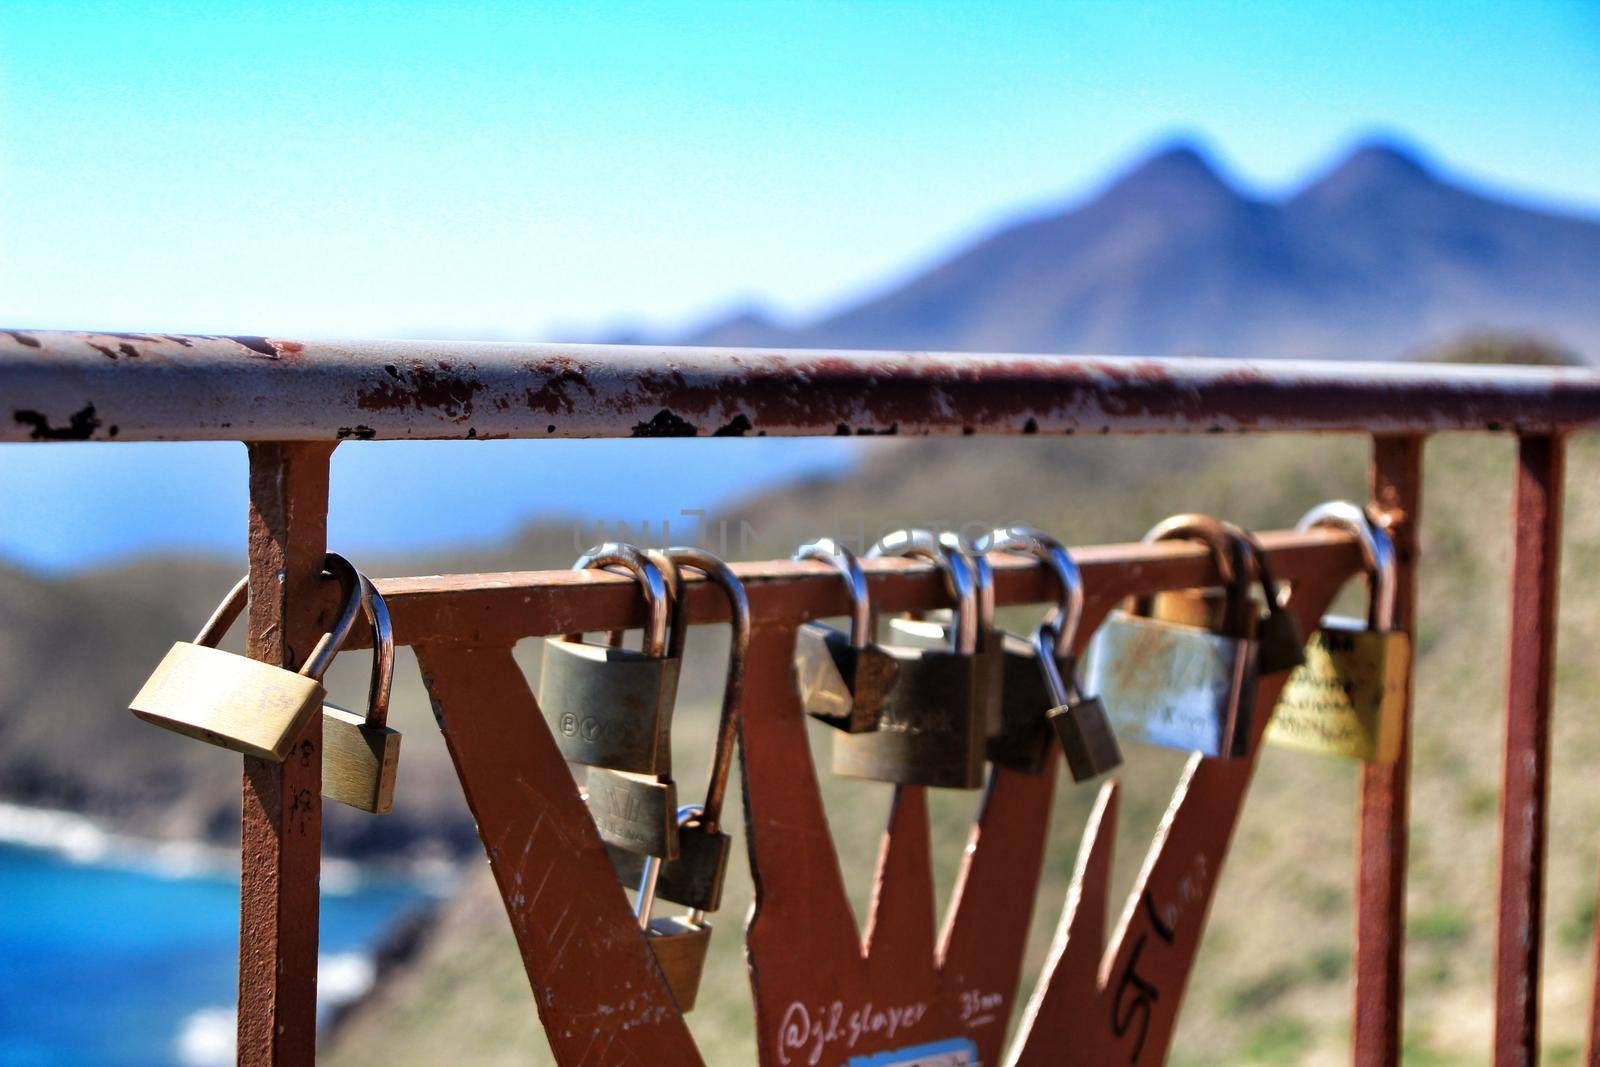 Almeria, Spain- September 23, 2018: Romantic Padlocks in the morning on a fence in Cabo de Gata. Volcanic mountains in the background.